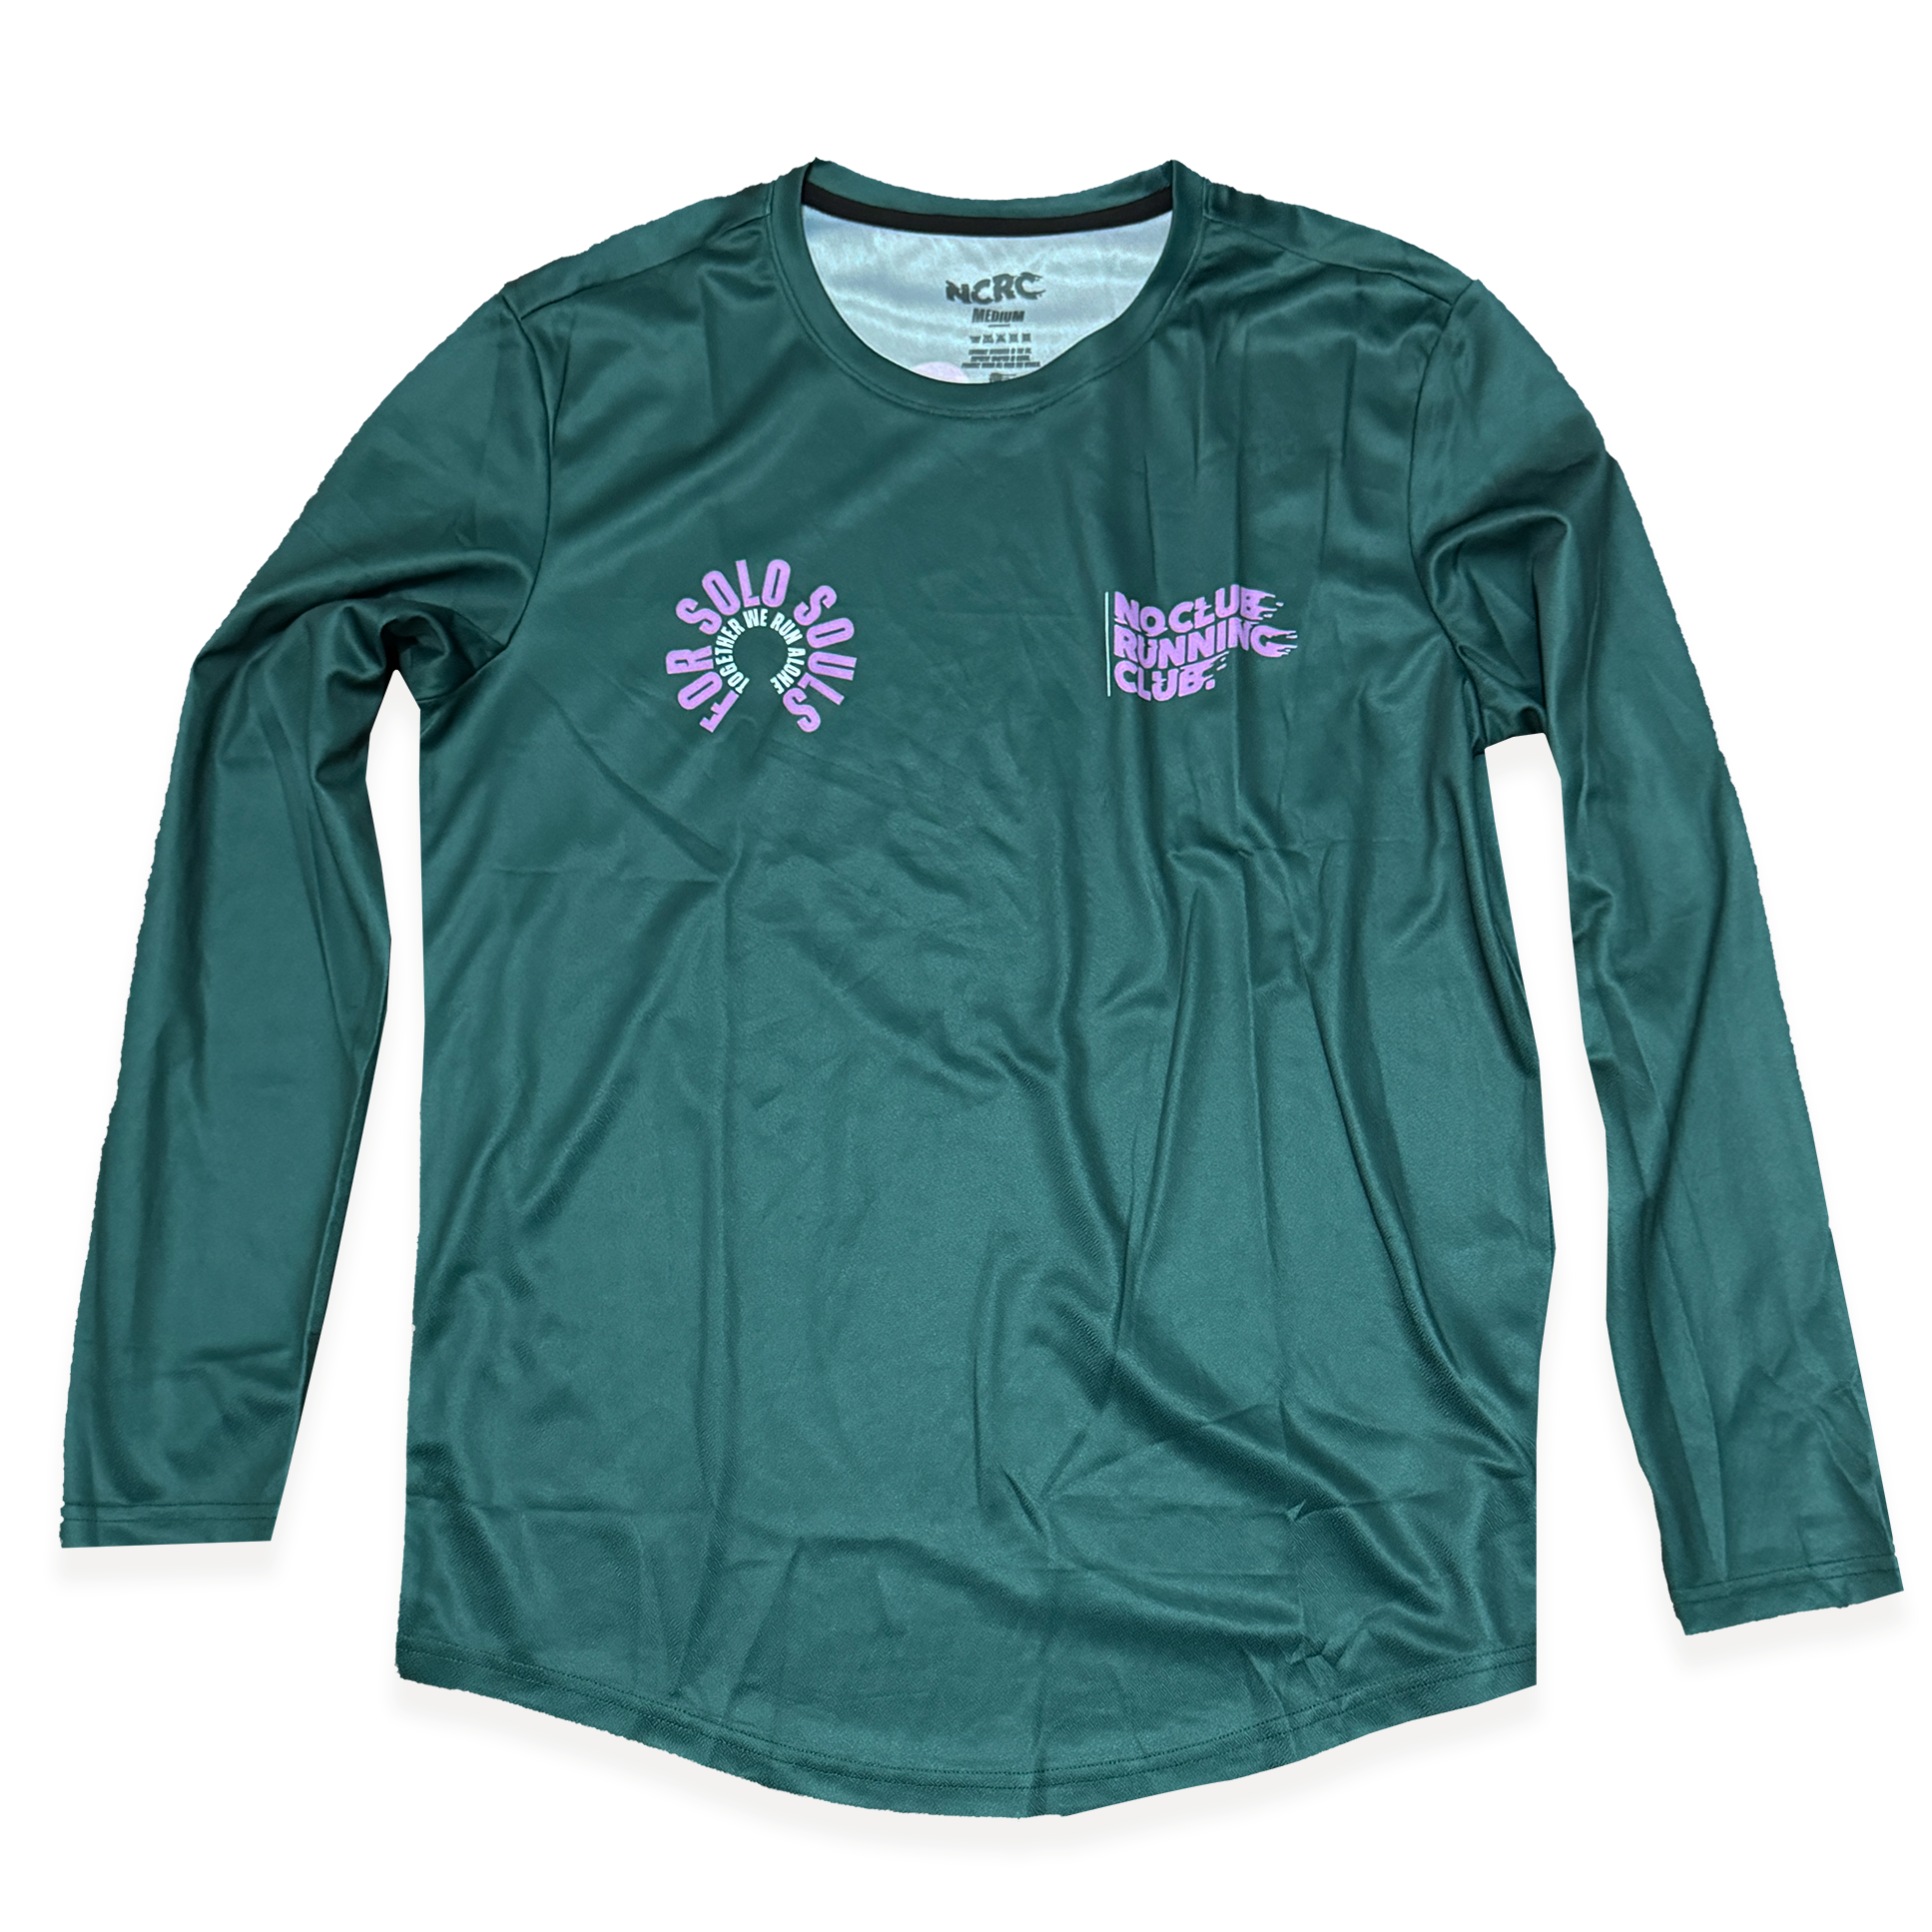 NCRC: Unisex Fits: Solo Souls -  Long Sleeve Training Jersey - Jade/Lavender/White